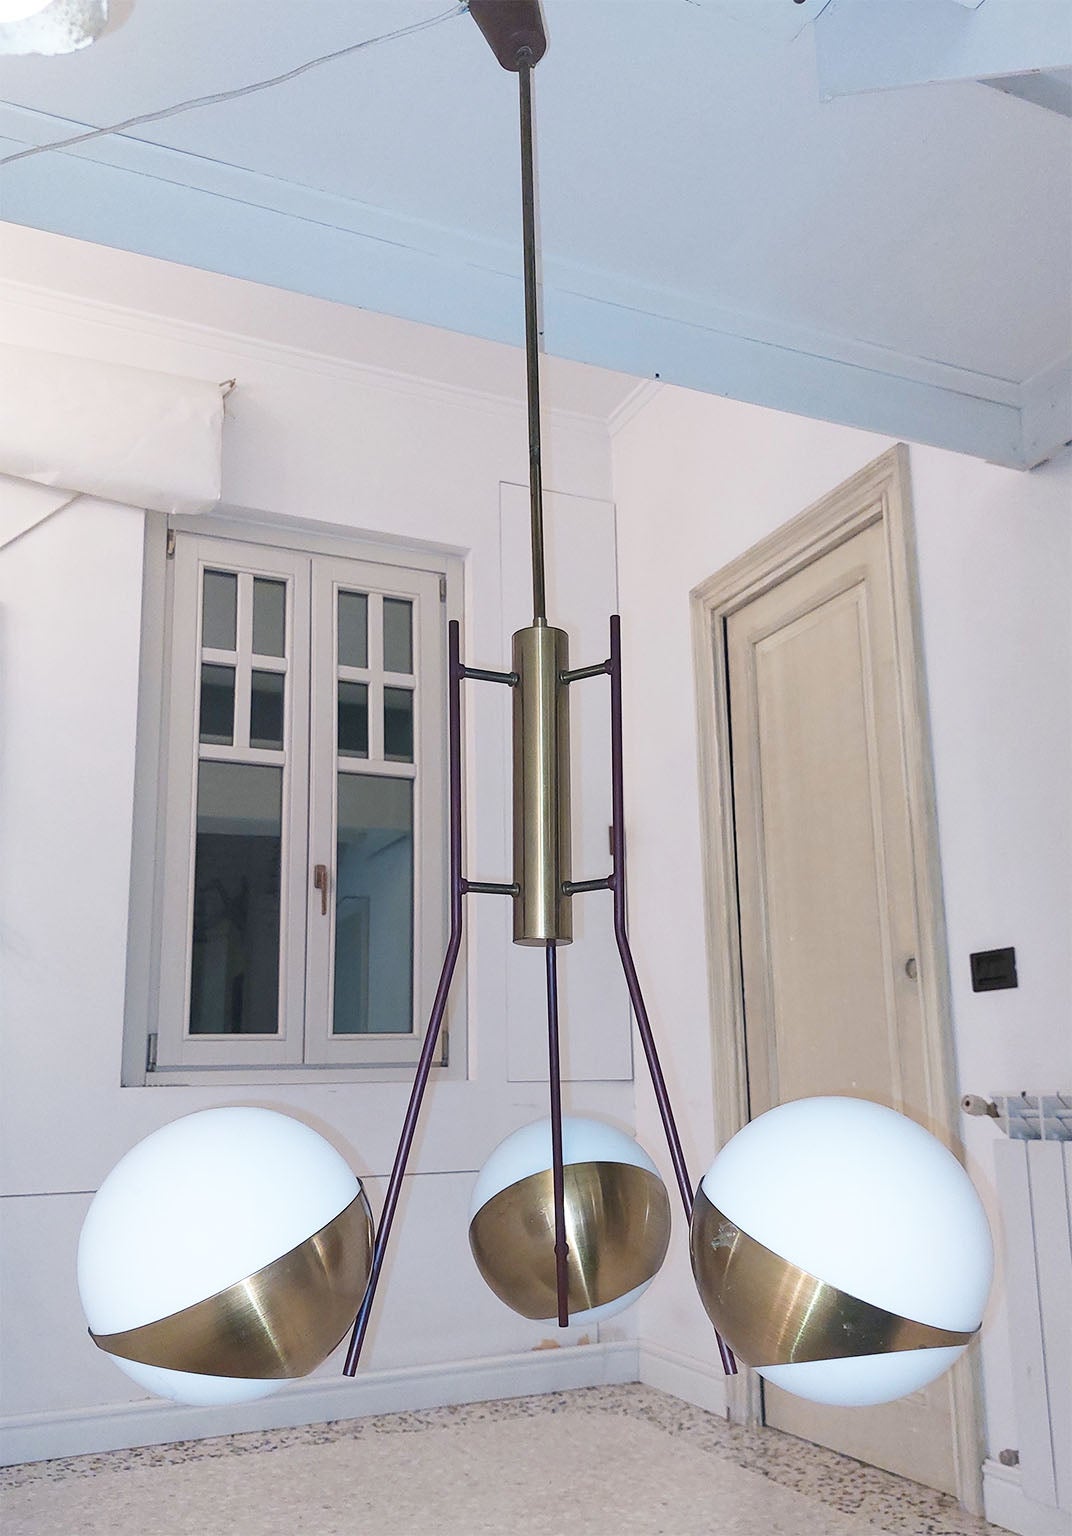 Beuatiful Chandelier by Stilnovo with three brass reflectors with inside glass spheres.
The central brass body support three brown/ burgundy lacquered arms, in the typical Stilnovo colour. 

Measure: diameter of the glasses : 17 cm / 6.69 inches